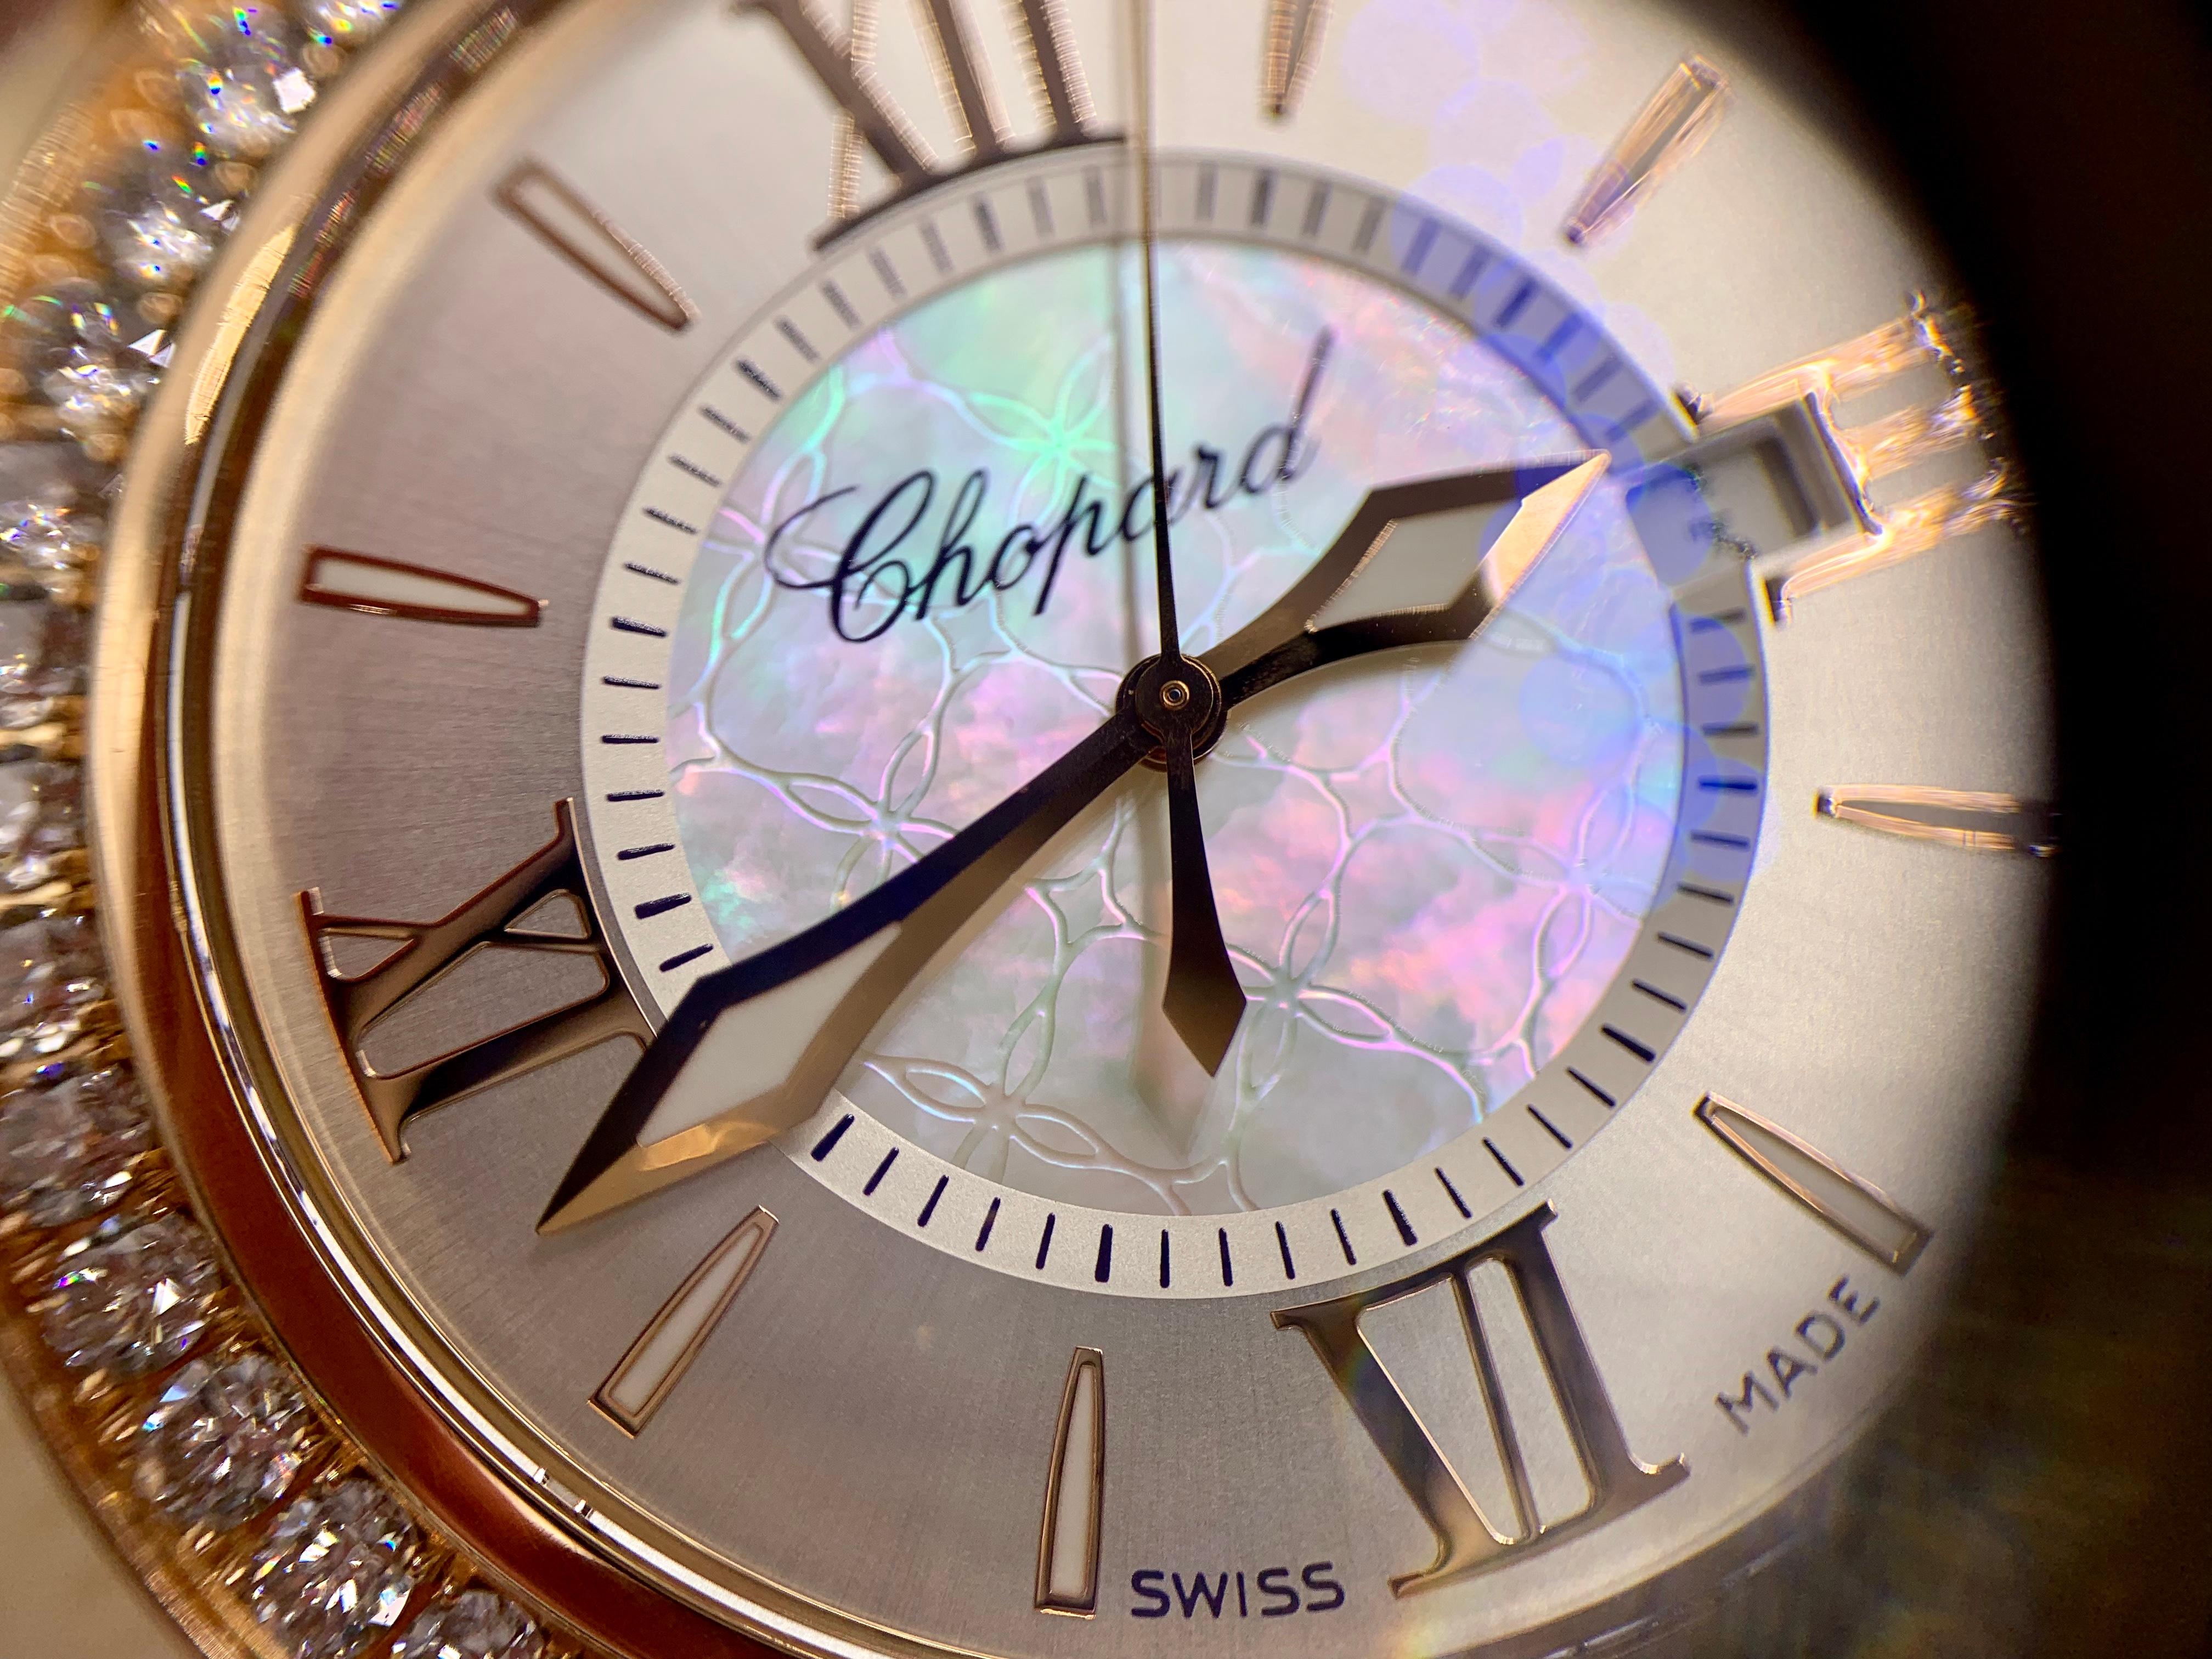 Chopard 18 Karat Rose Gold and Diamond Imperiale Watch In Excellent Condition For Sale In Pikesville, MD